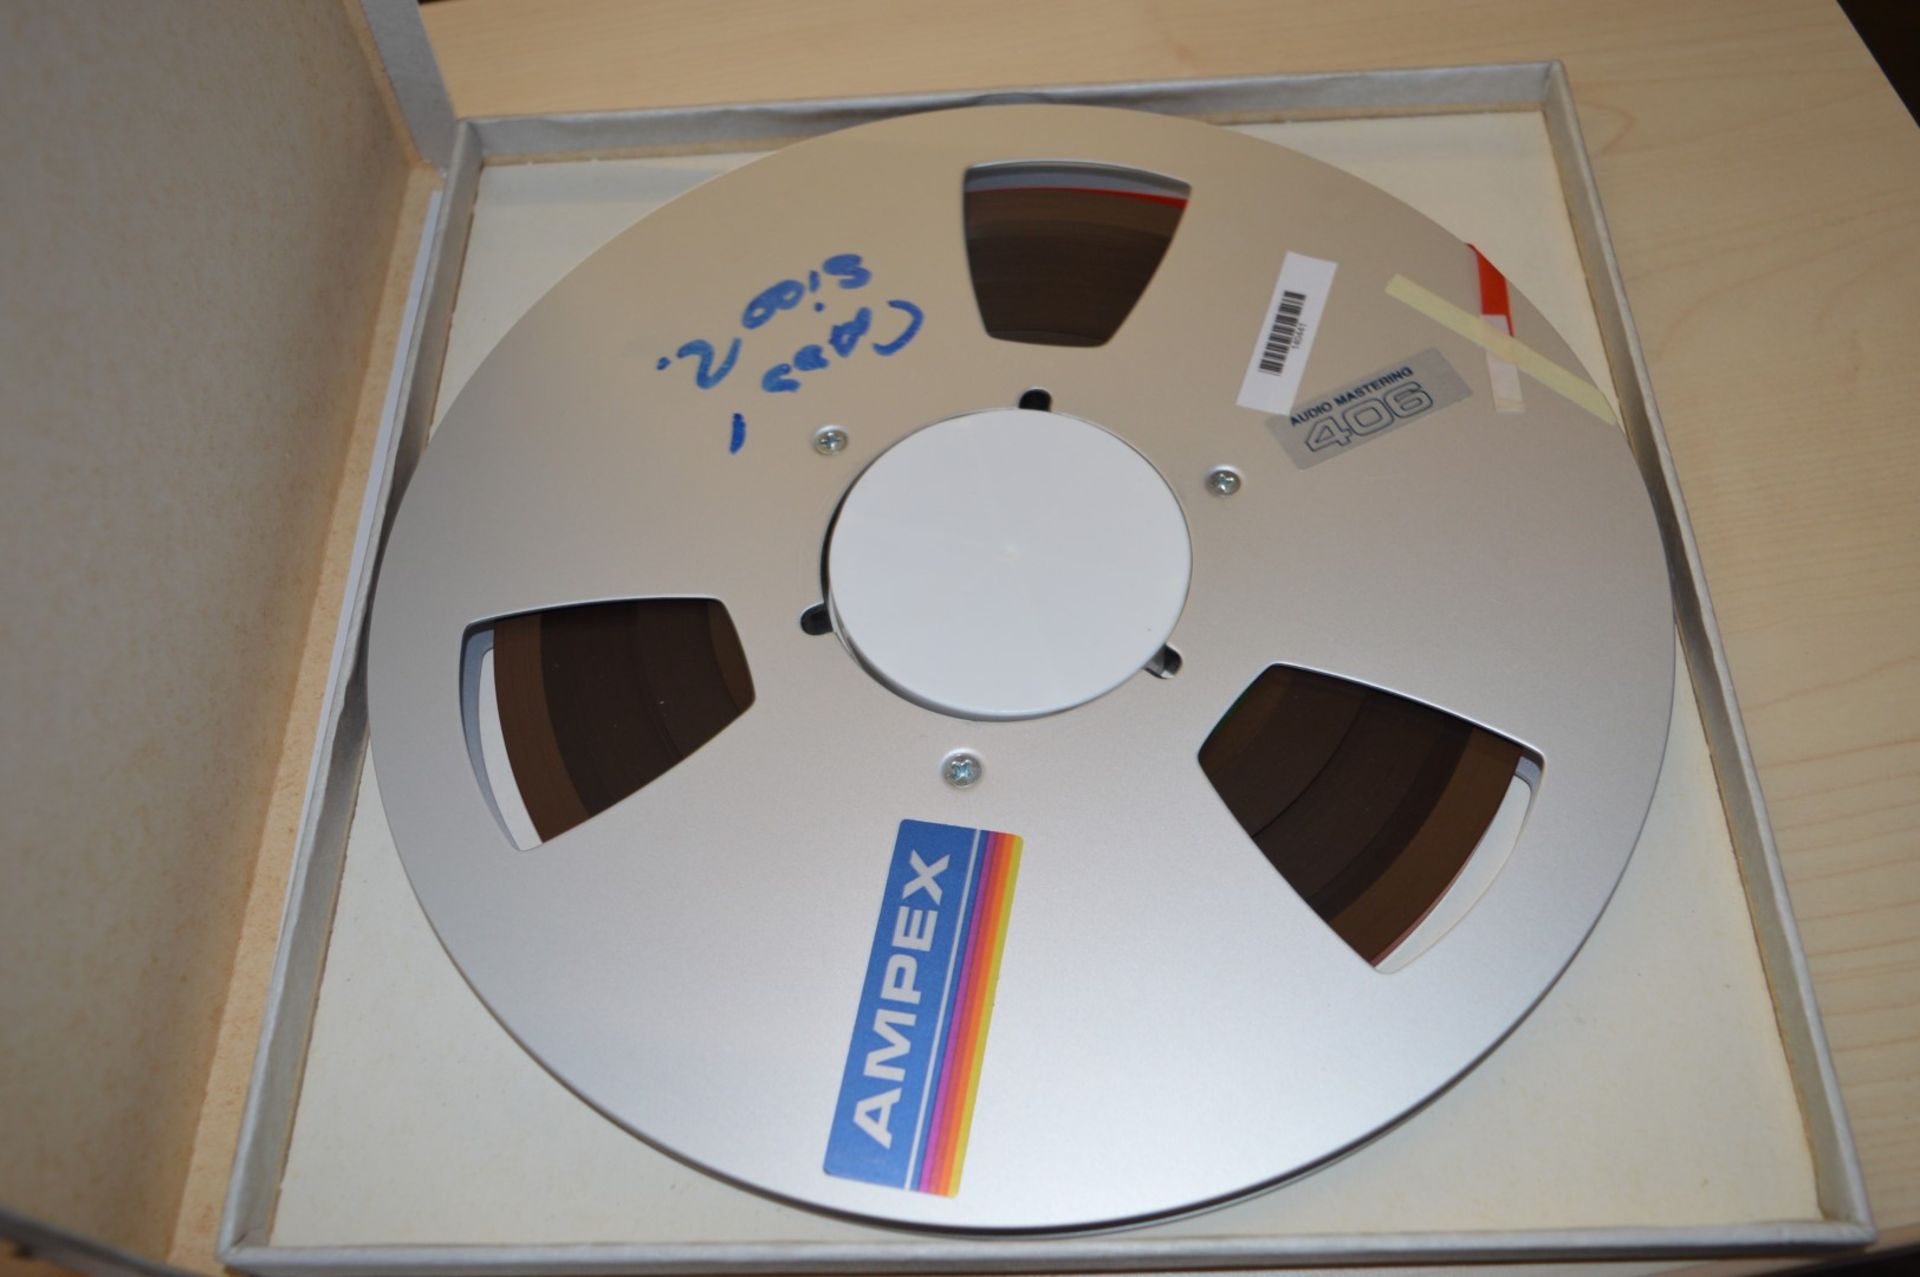 10 x Ampex 406 Reel to Reel Spools With Tape and Original Boxes - CL185 - Ref DRT0039 - Location: